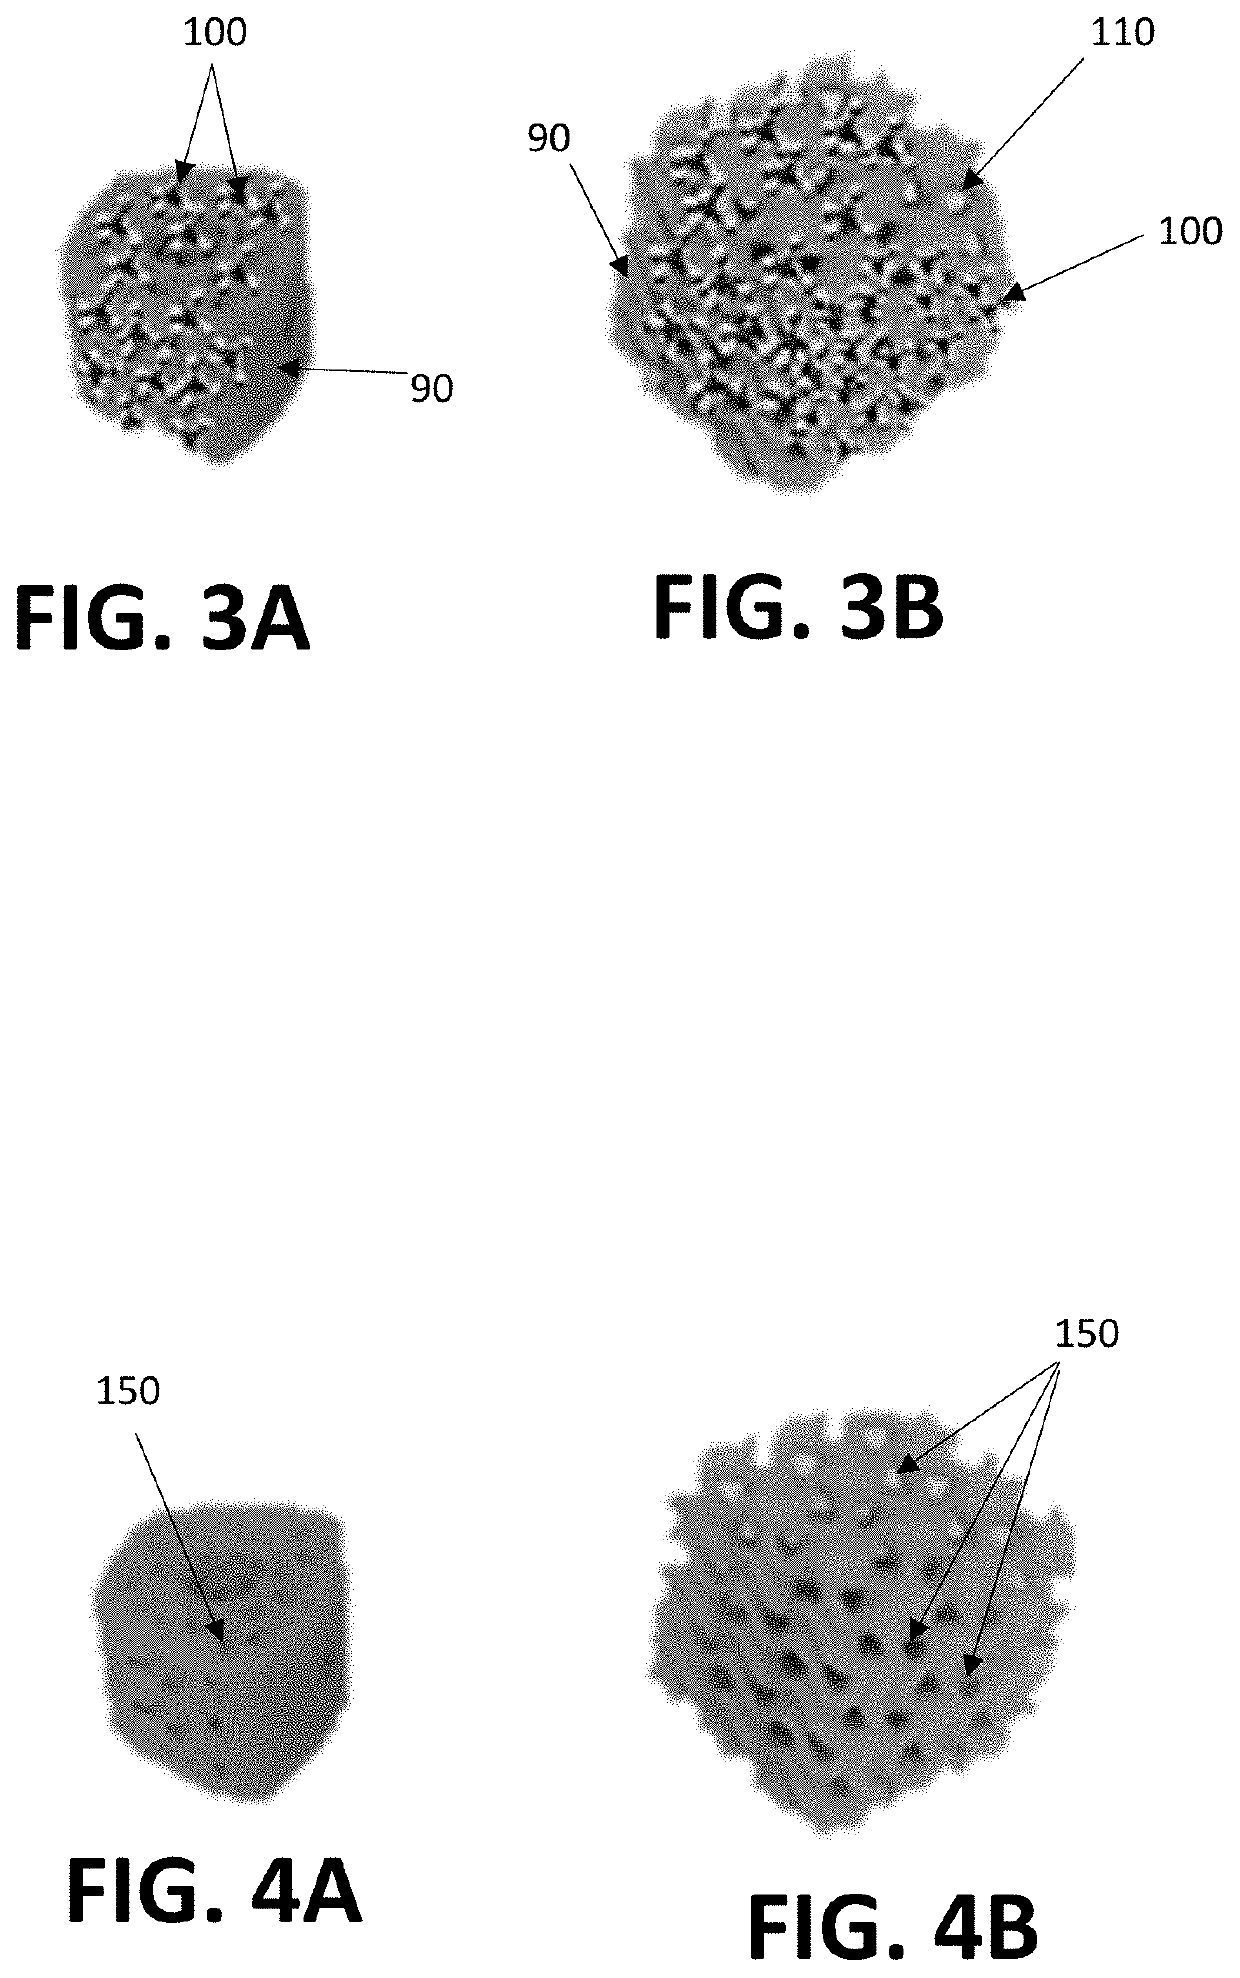 Mixed material implants incorporating additives